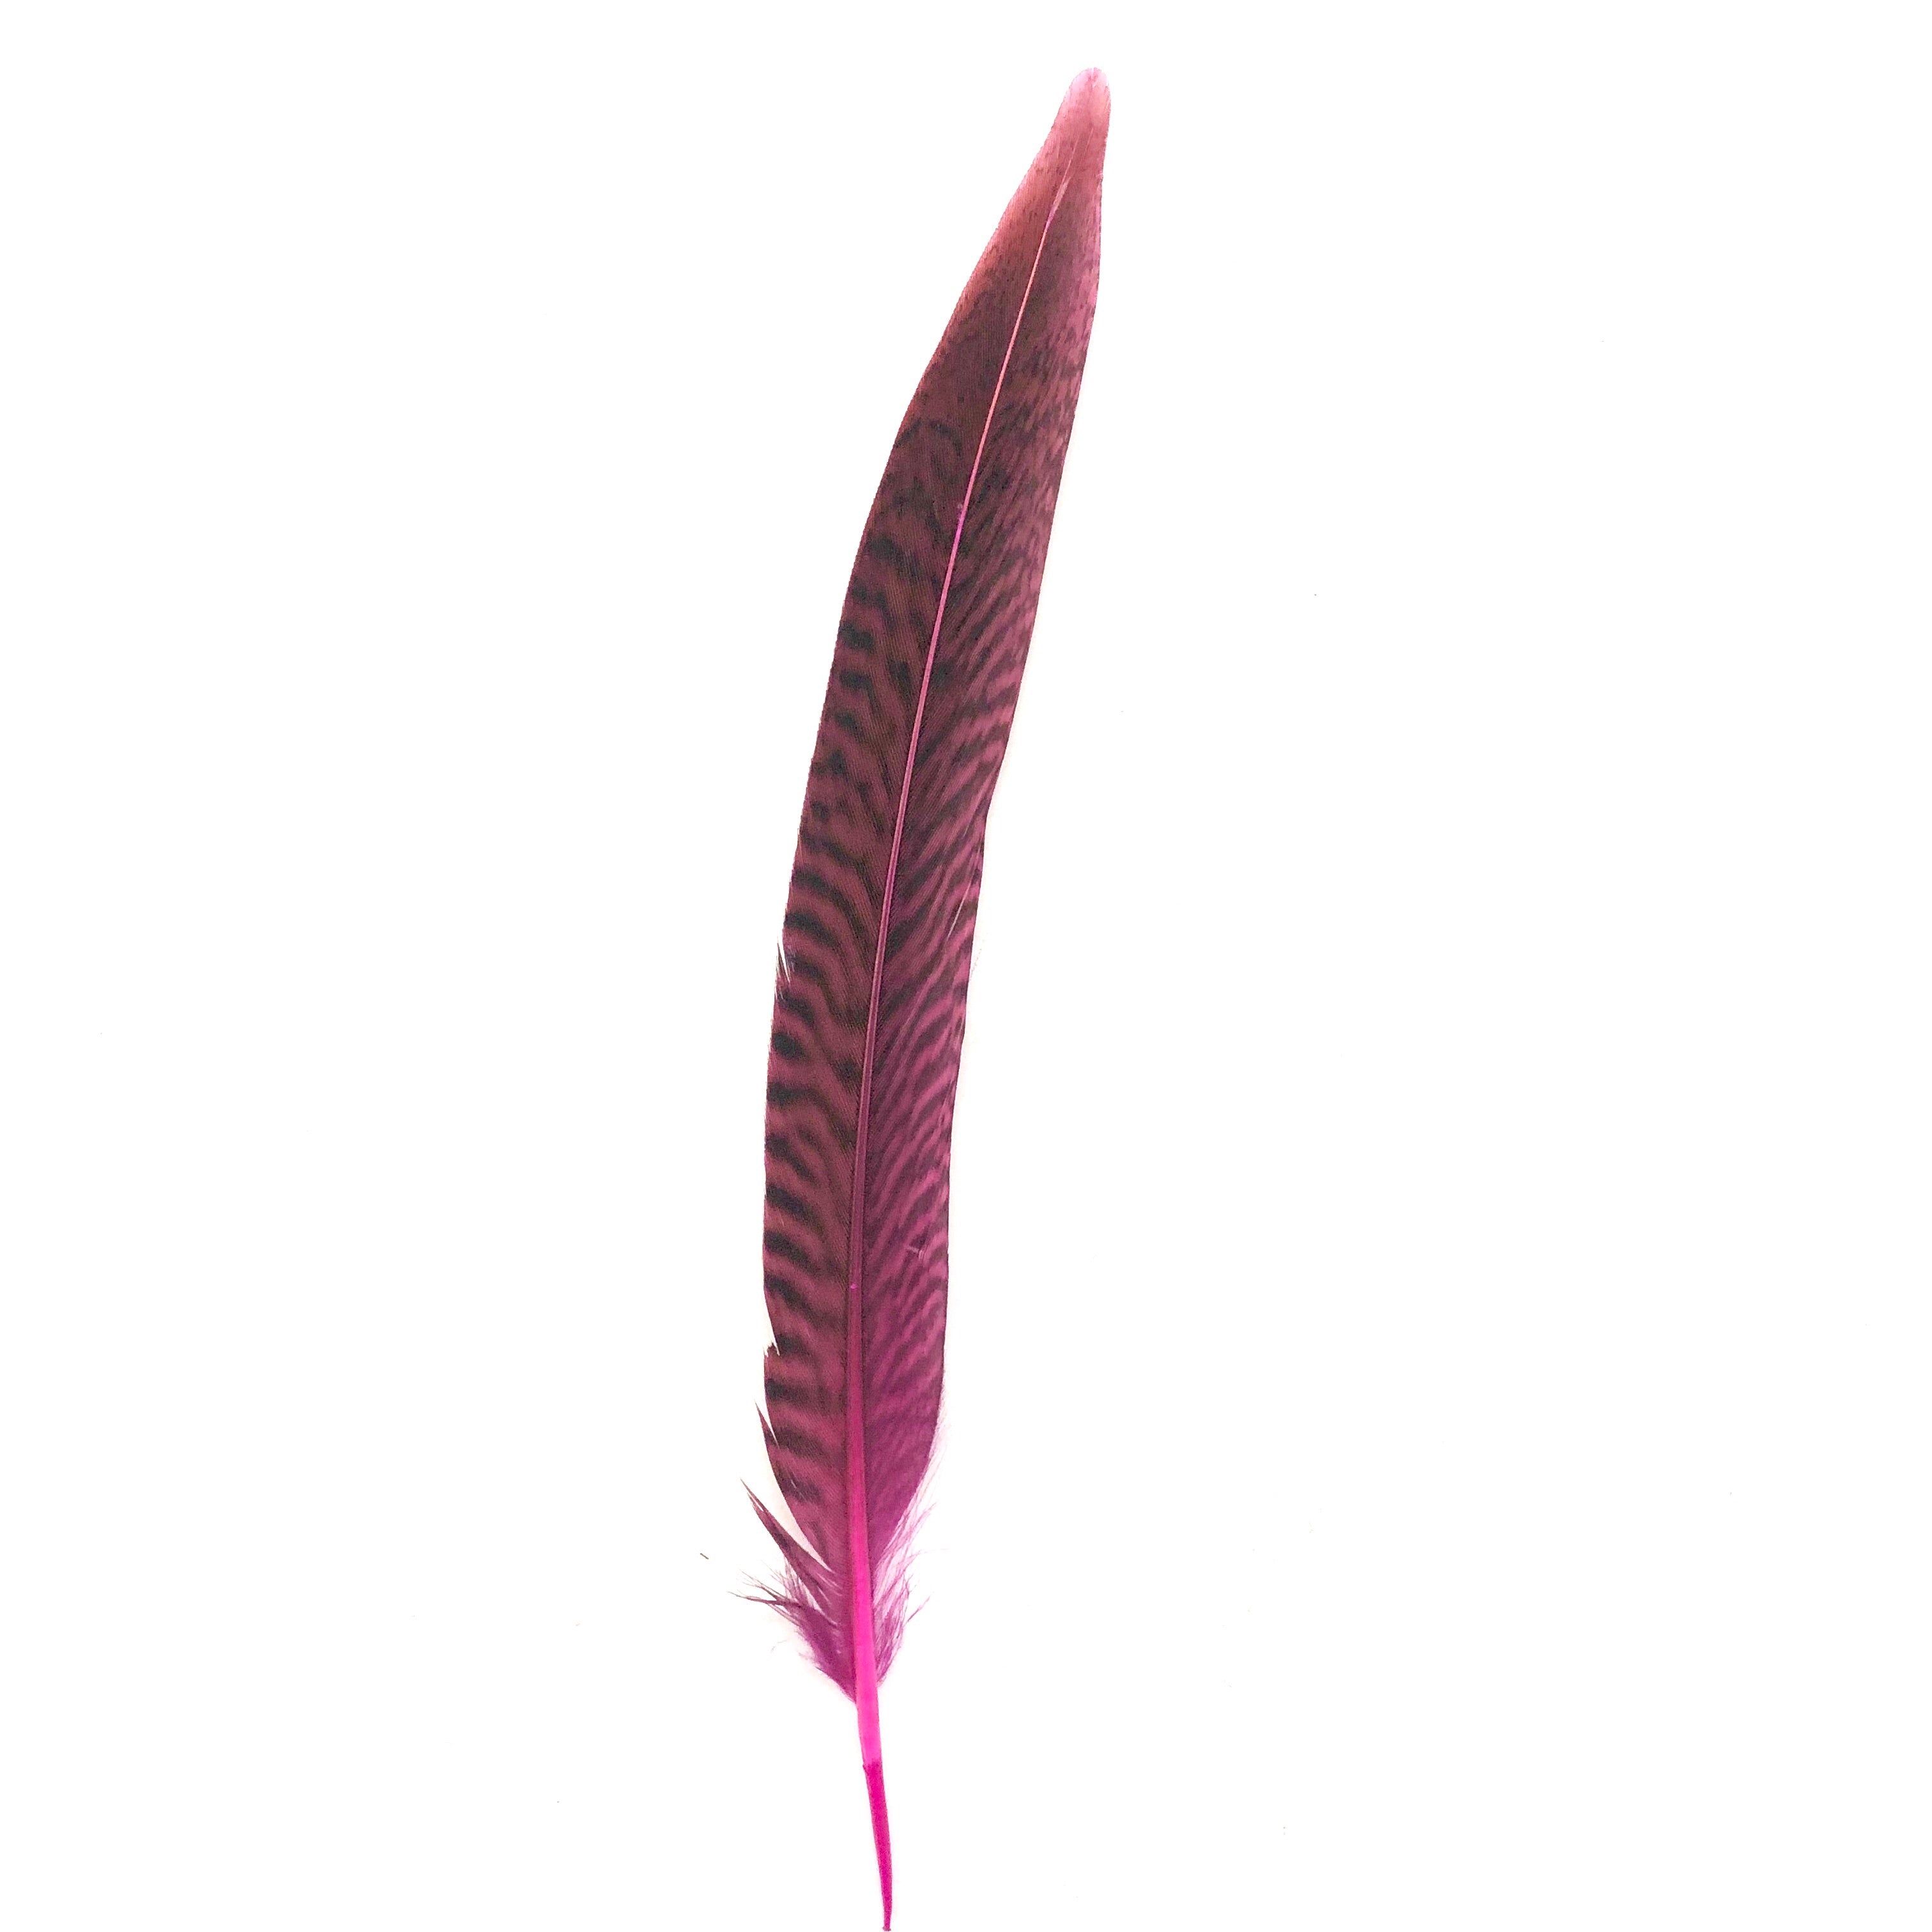 6" to 10" Golden Pheasant Side Tail Feather x 10 pcs - Hot Pink